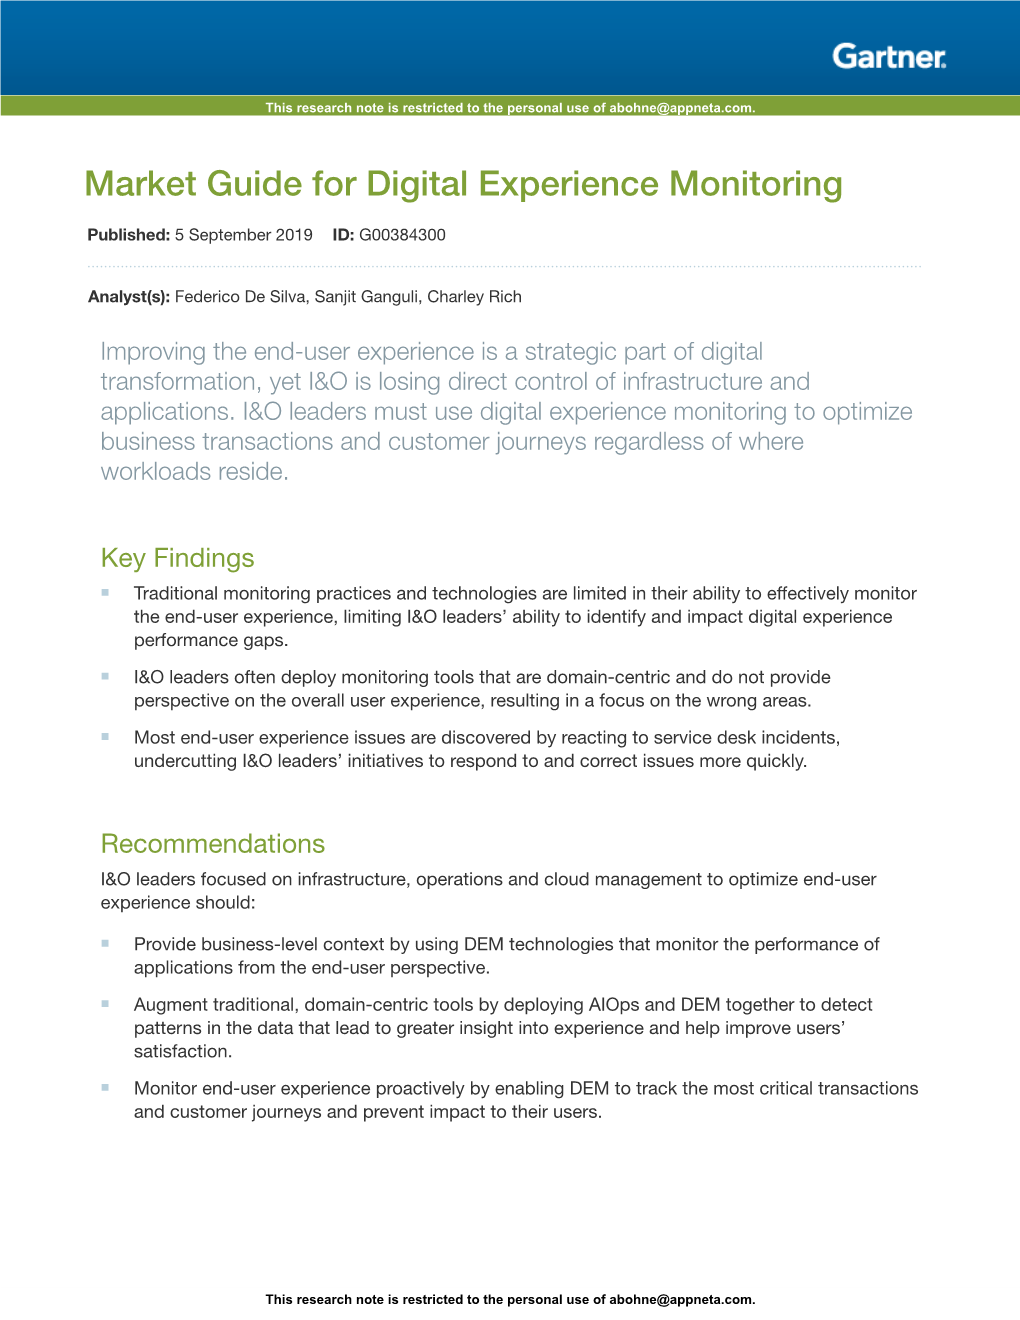 Market Guide for Digital Experience Monitoring